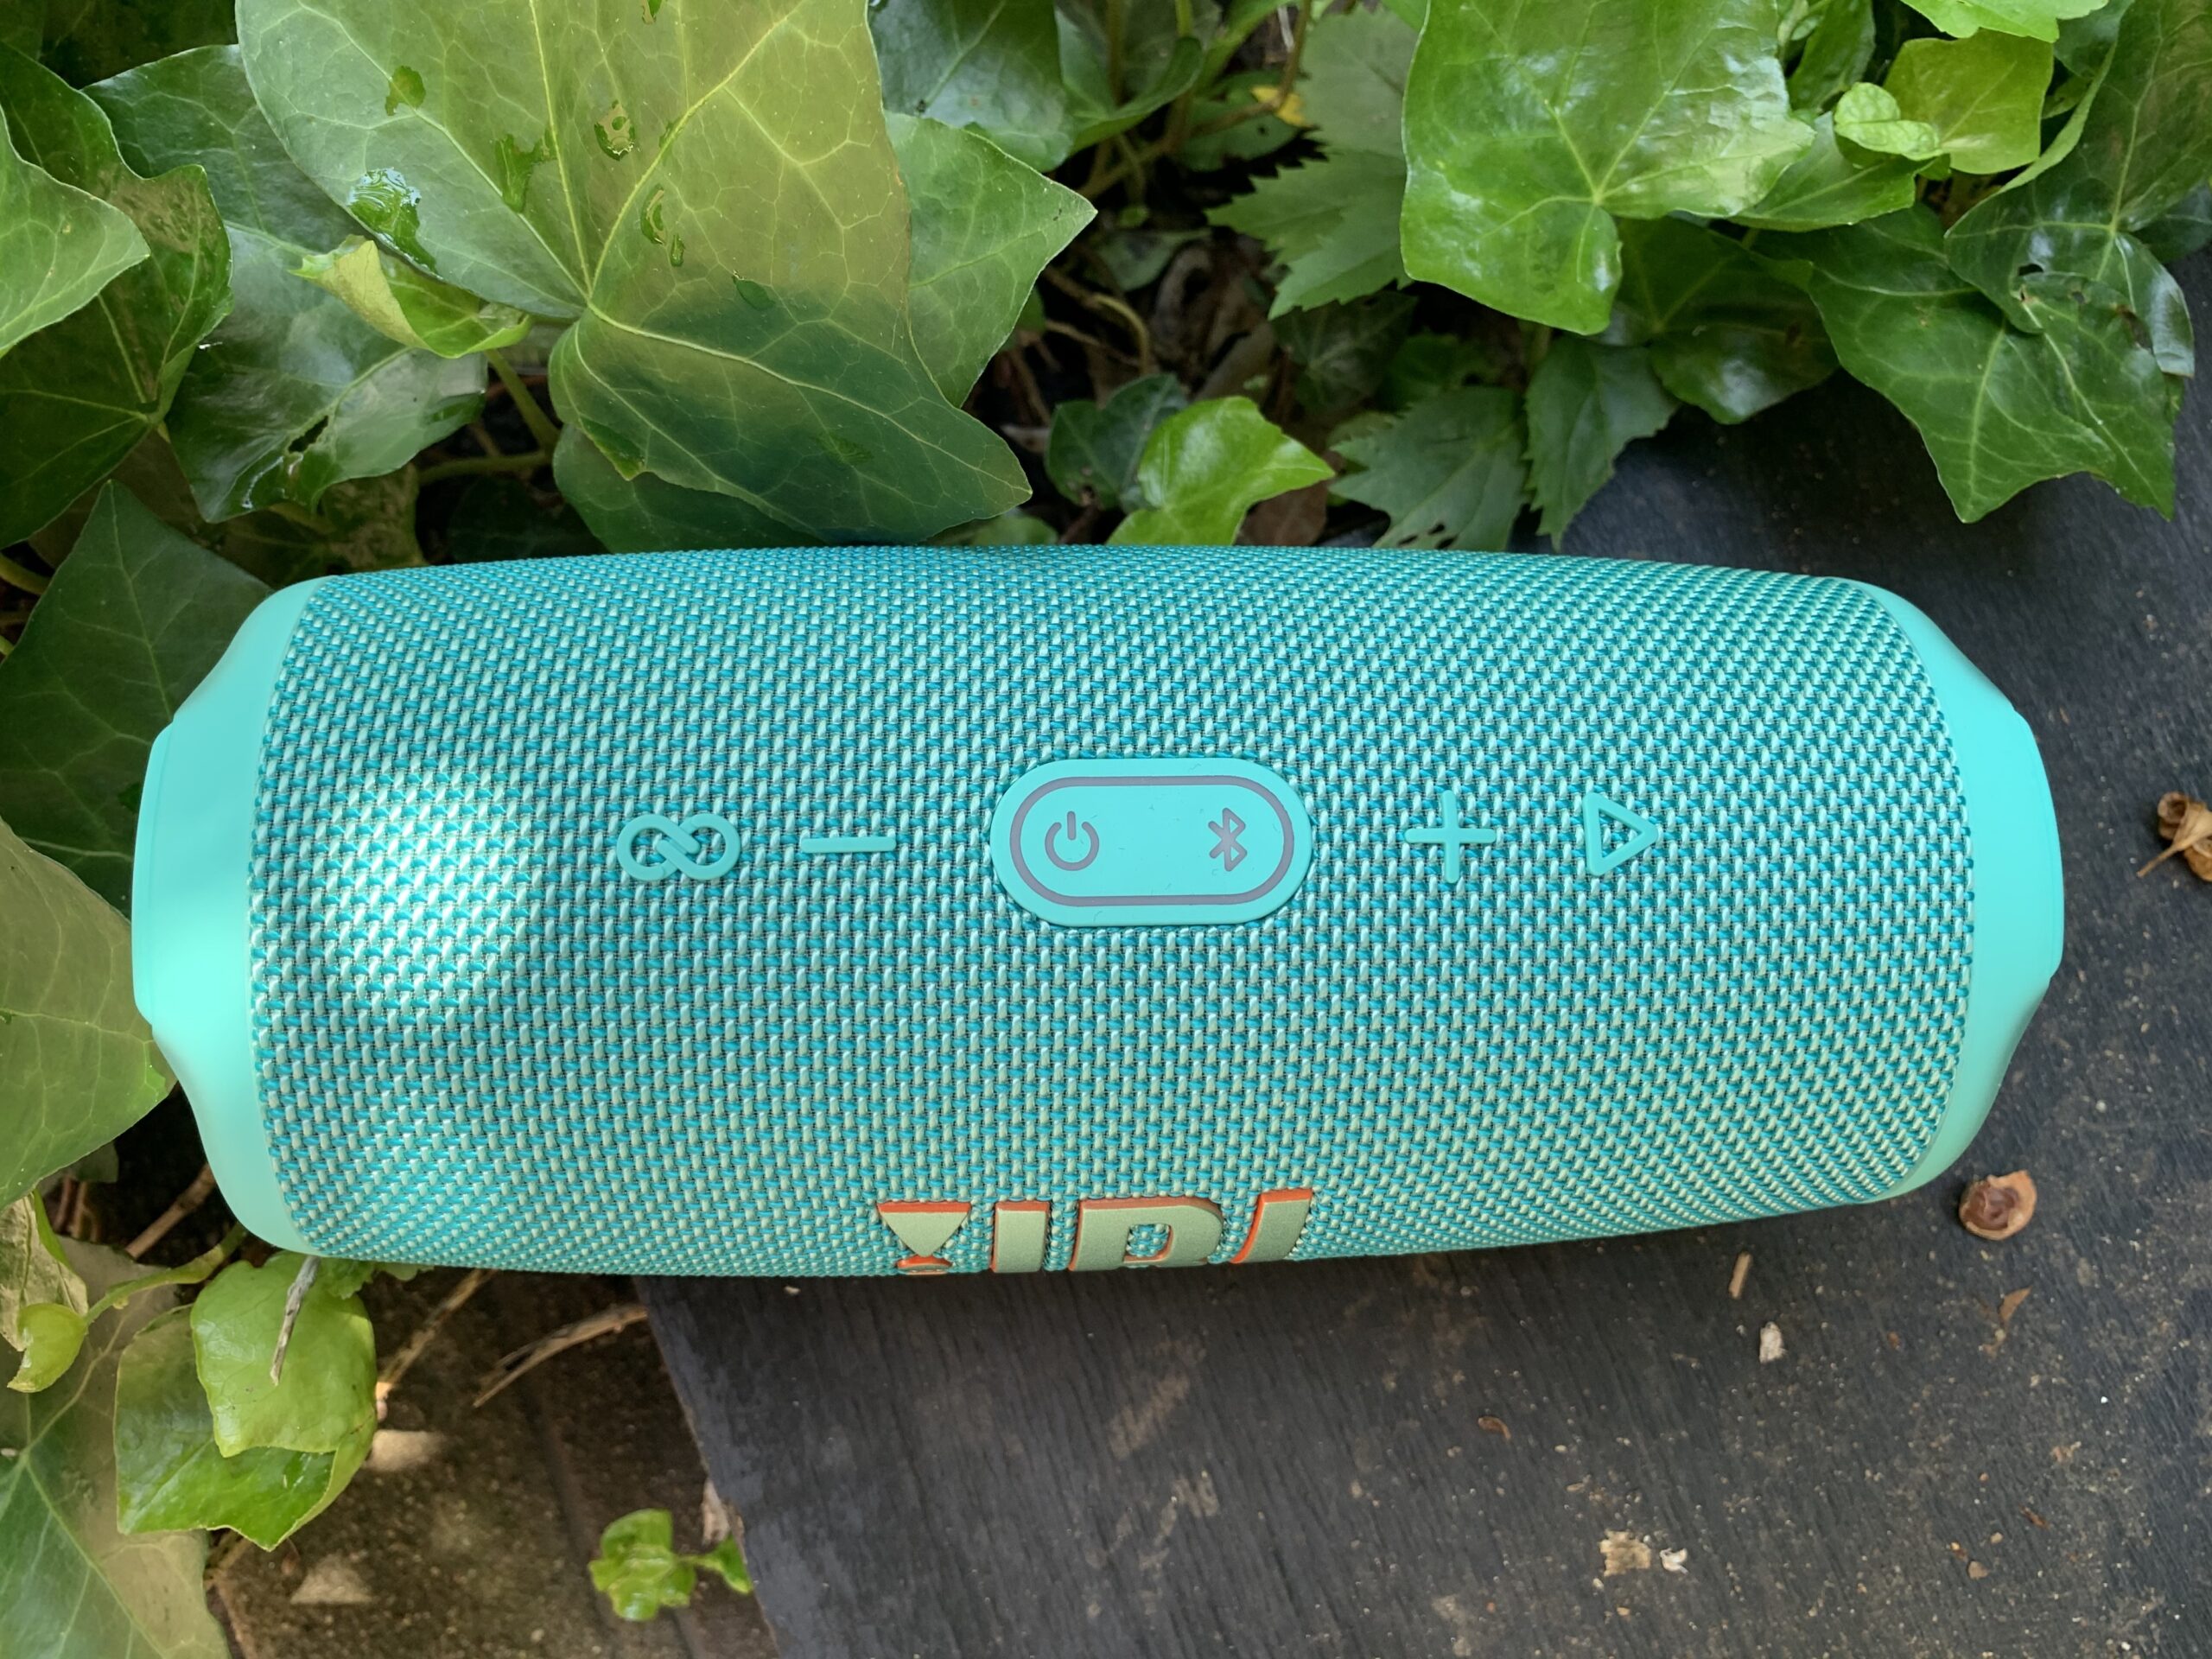 JBL Charge 5 review: Big sound for summer listening